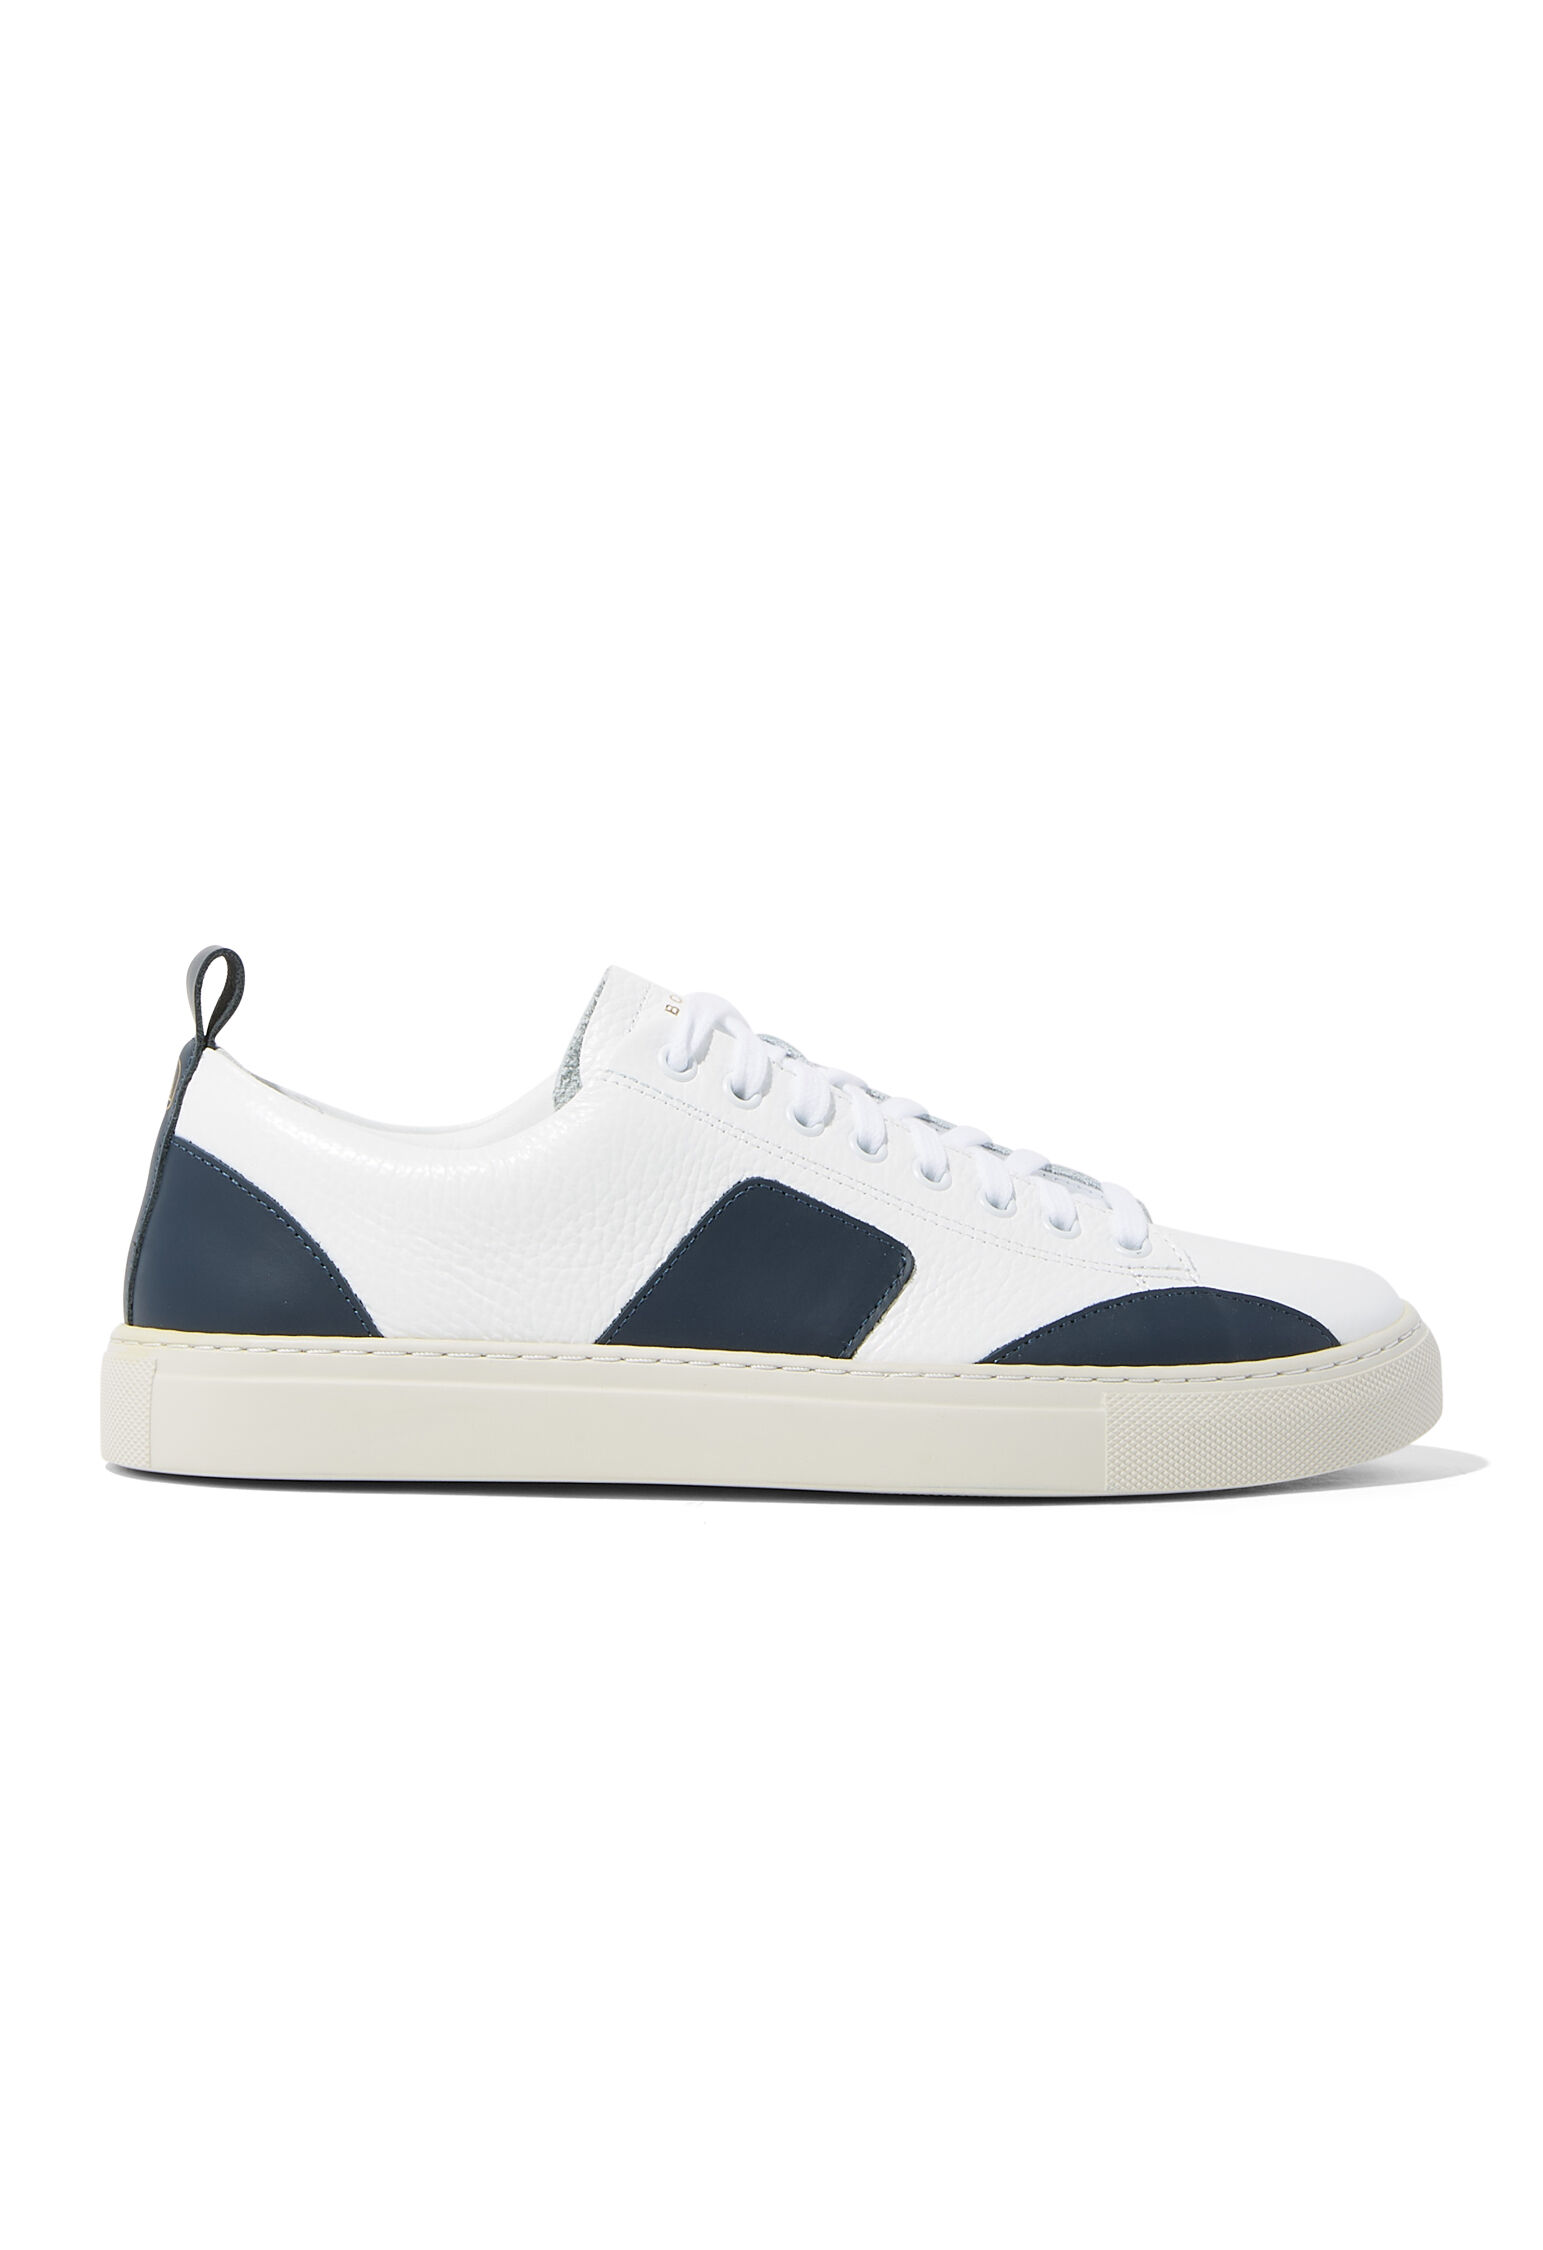 Italian Blue & Golden Arrow Sneakers For Men And Women High Quality  Leather, Classic White Casual Shoes With Side Arrows From  Brandshoesupplier, $94.11 | DHgate.Com